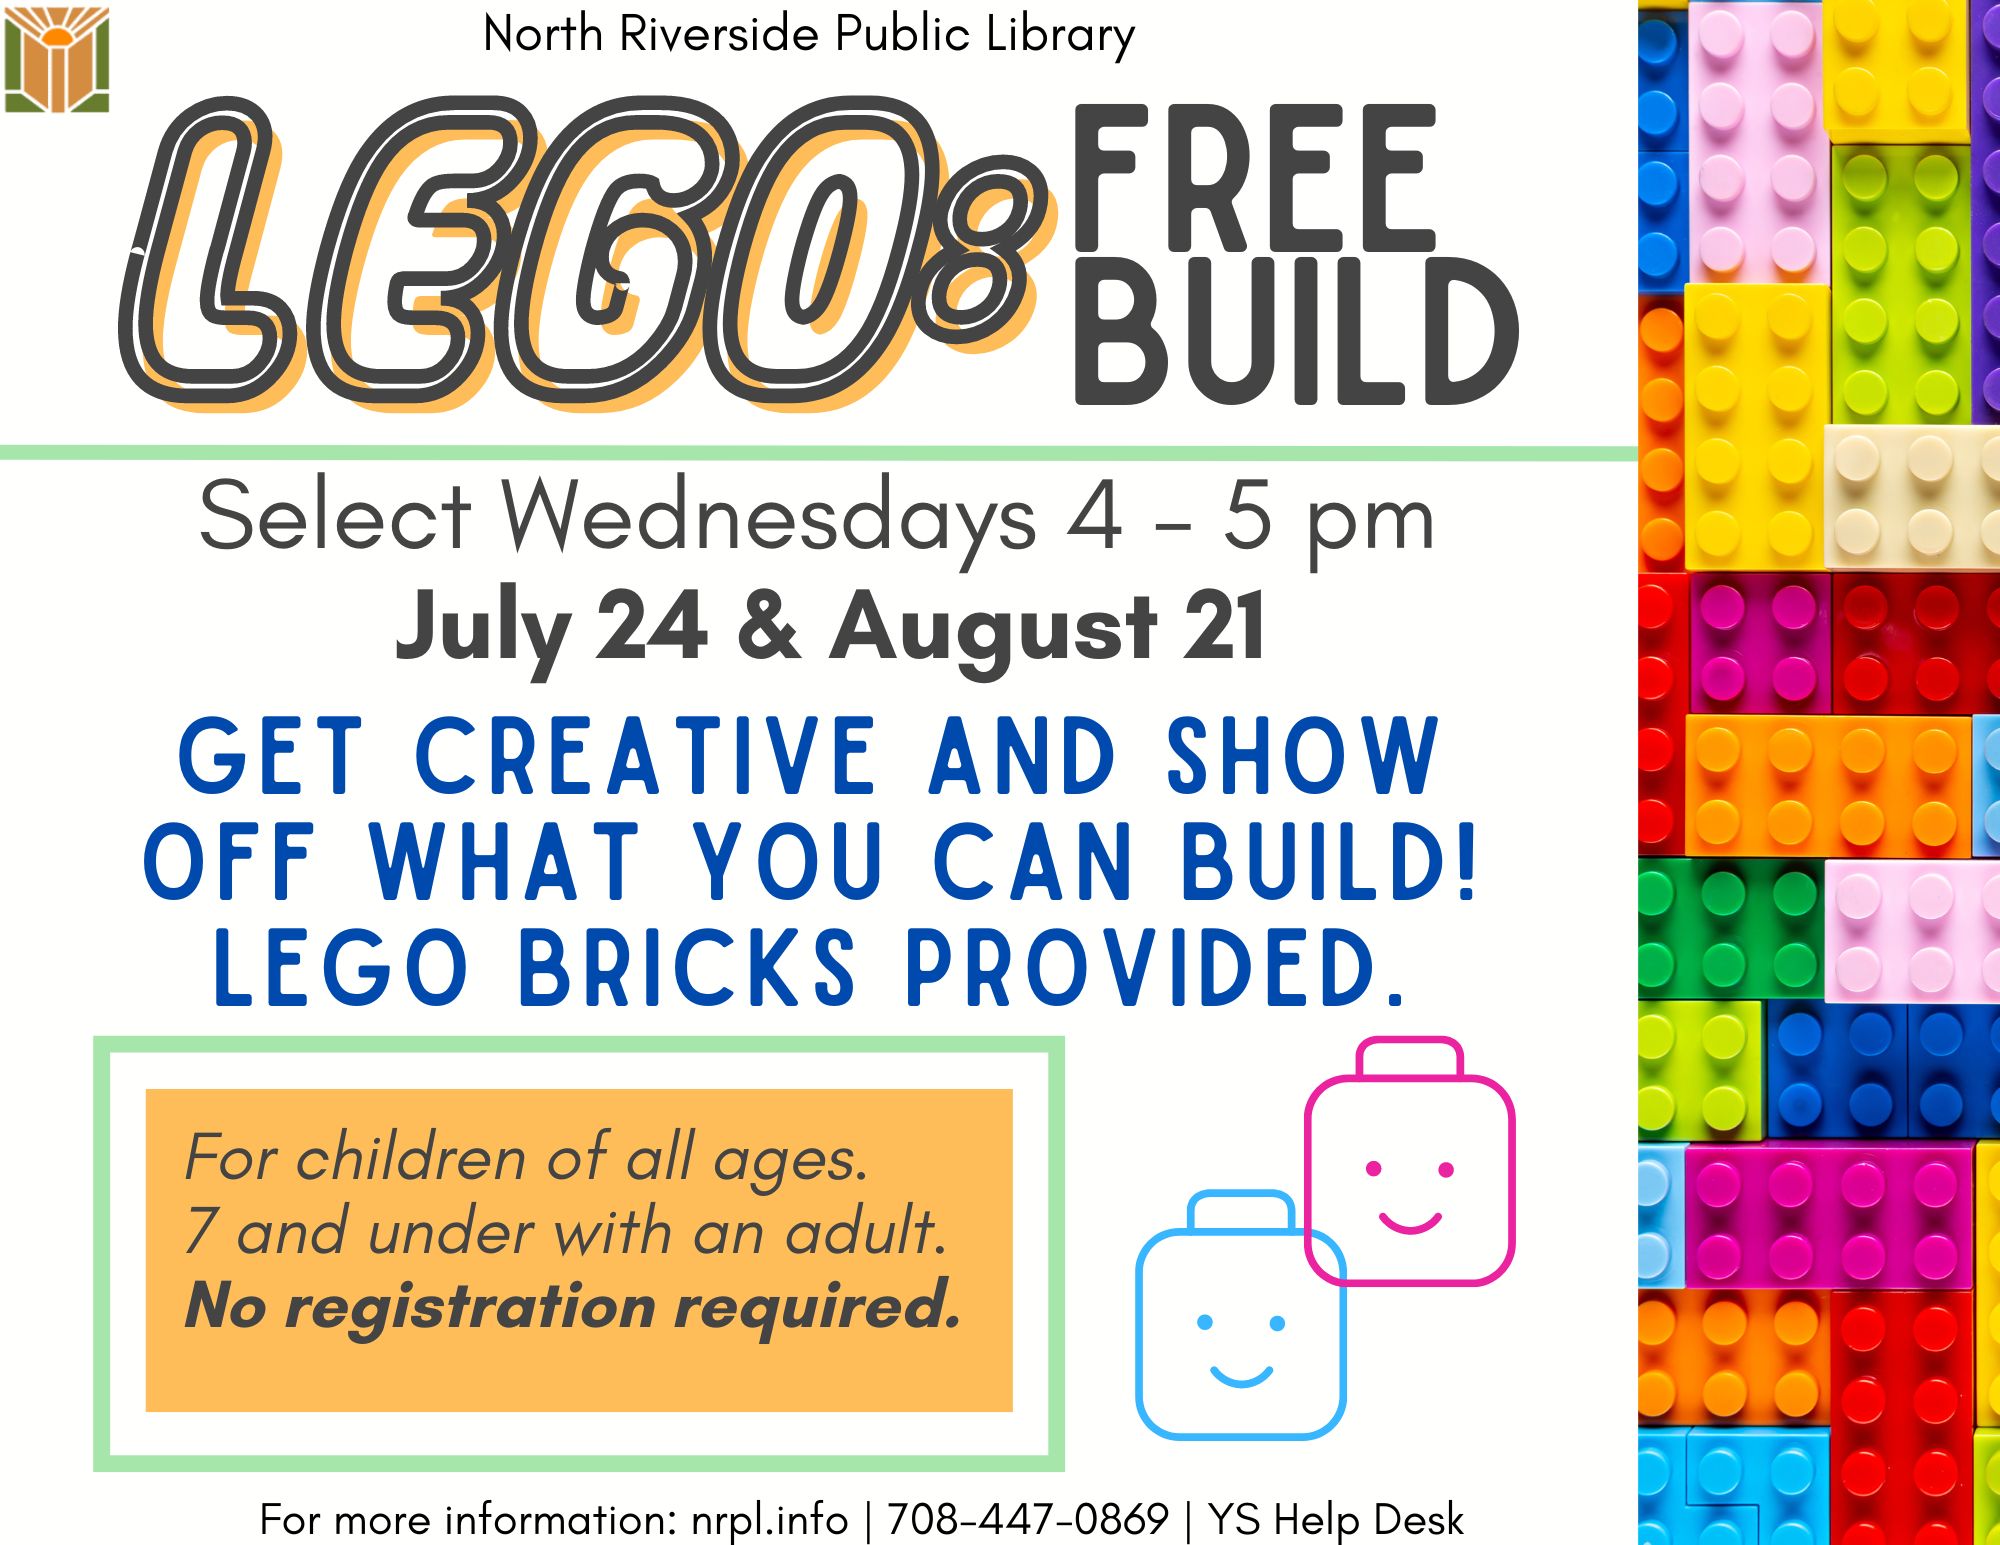 Lego Free Build. Select Wednesdays 4- 5 pm. July 24th & August 21st. Get creative and show off what you can build! LEGOs provided. For children of all ages, 7 and under with an adult. No registration required.